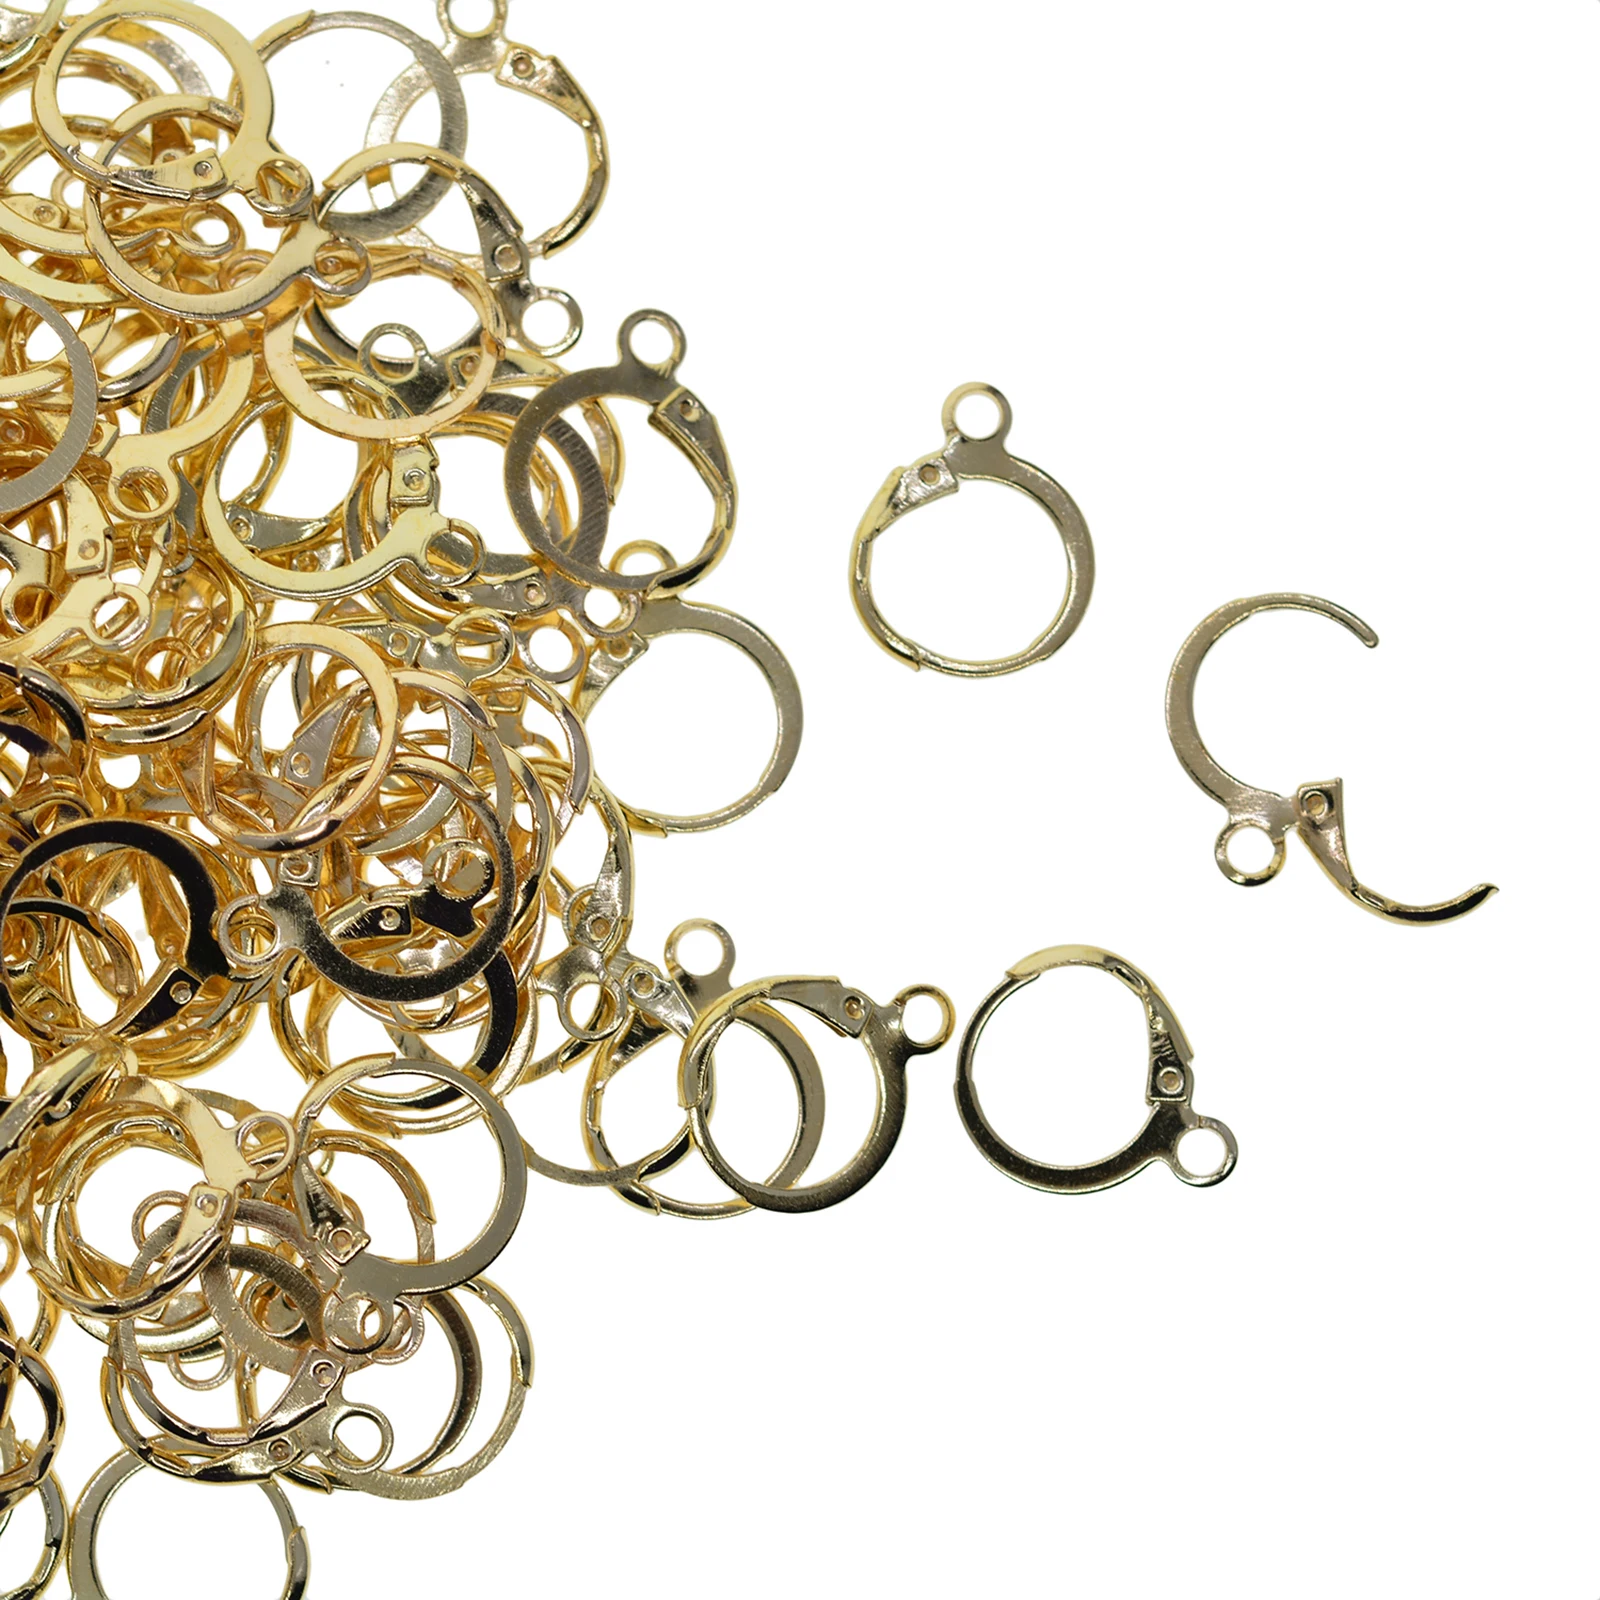 200x Lever Back Earring Hooks 12x15mm Women Ladies Ear Wire Replacement for Jewellery Making Findings DIY Crafts Accessories